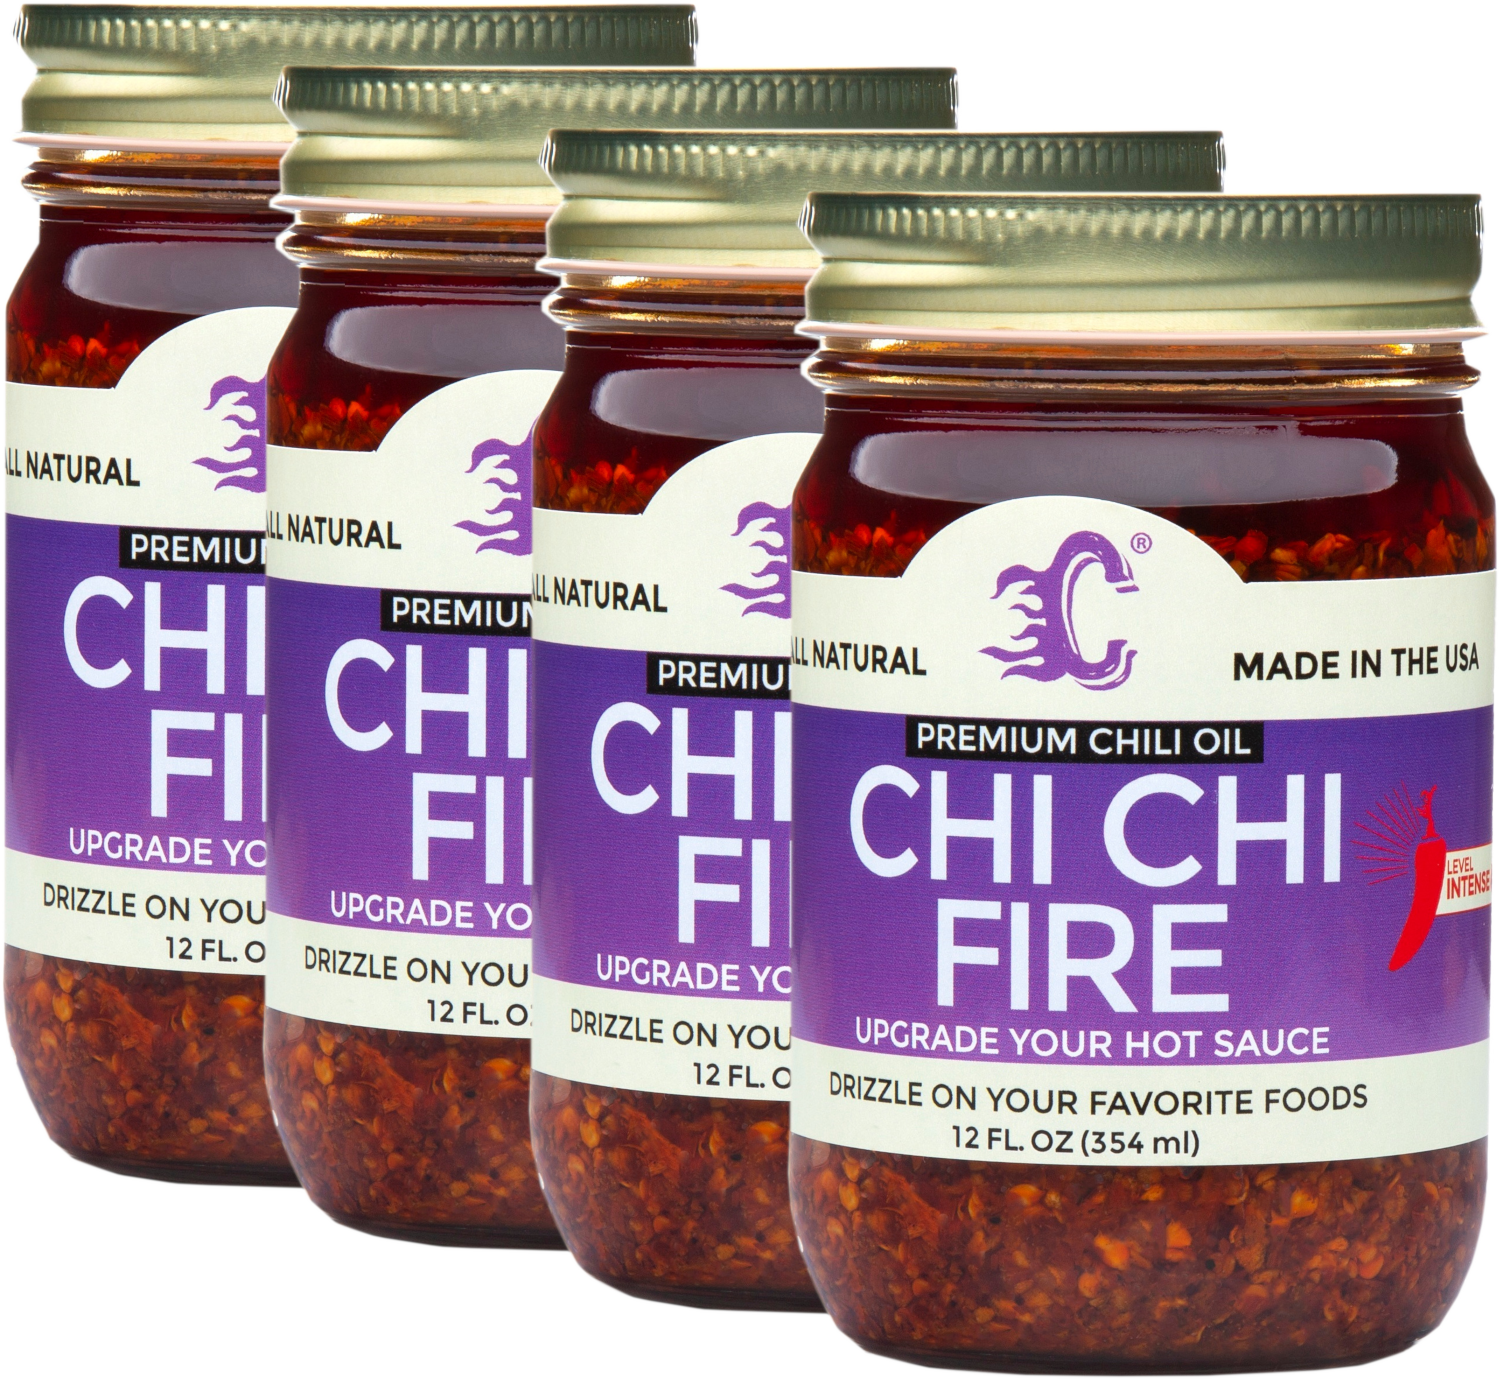 Introducing Chi Chi Fire! - For All You Serious Spicy Chili Oil Enthusiasts